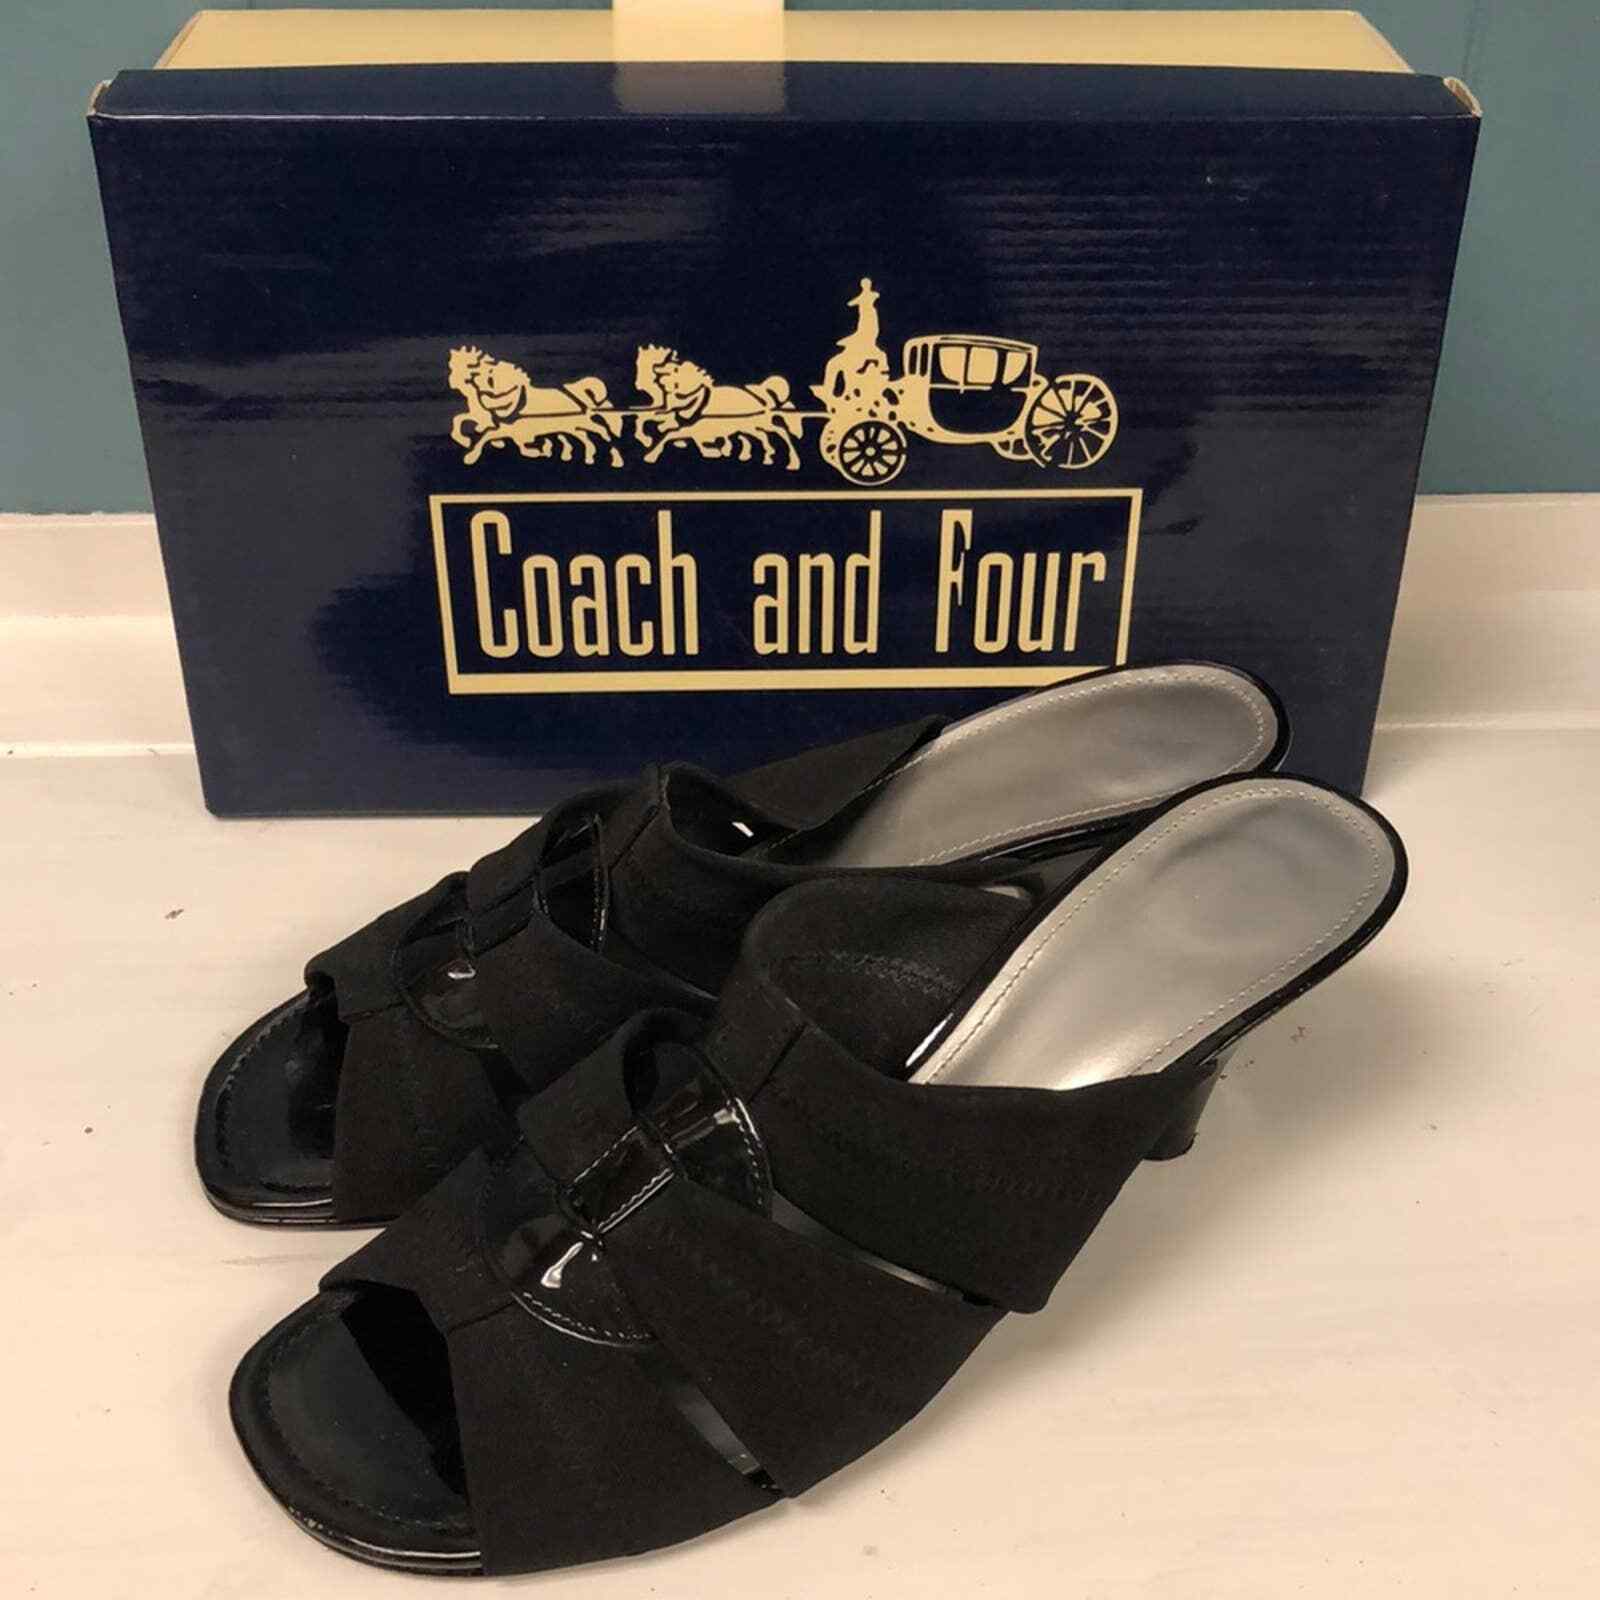 Primary image for Coach and Four Sushem black patent kitten heel elastic strappy sandals size 8.5